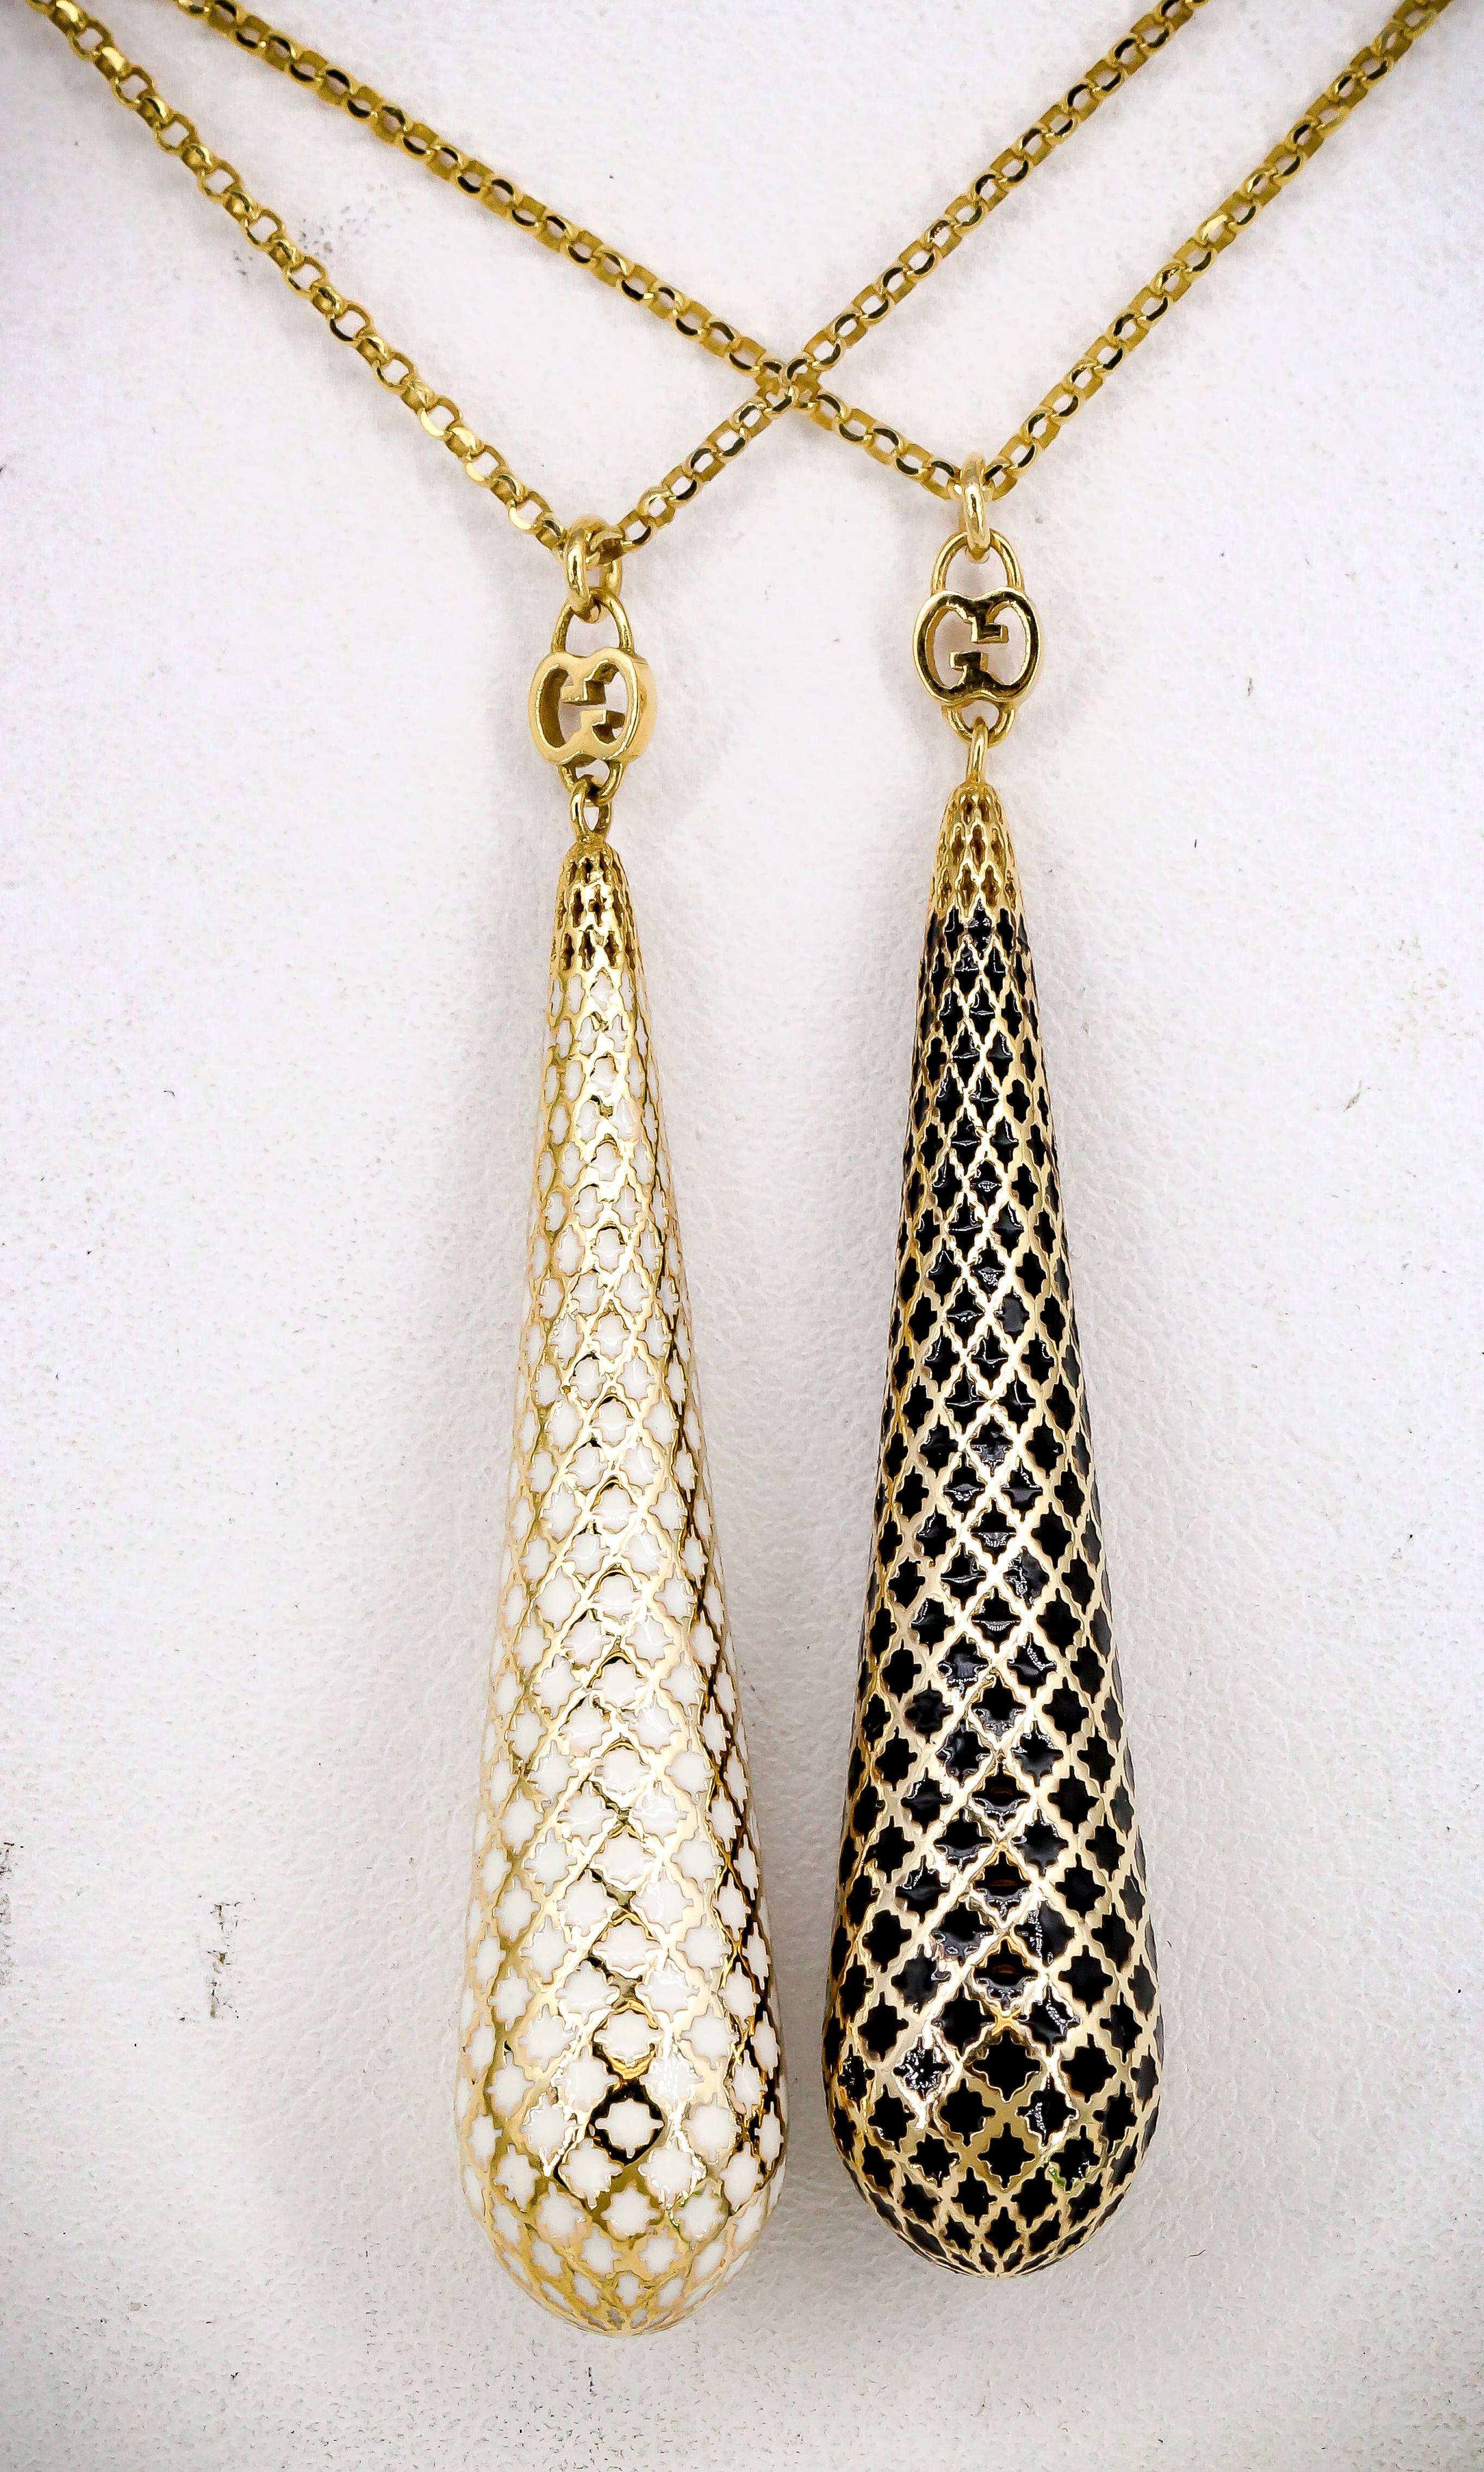 Elegant pair of enamel and gold pendant necklaces from the 